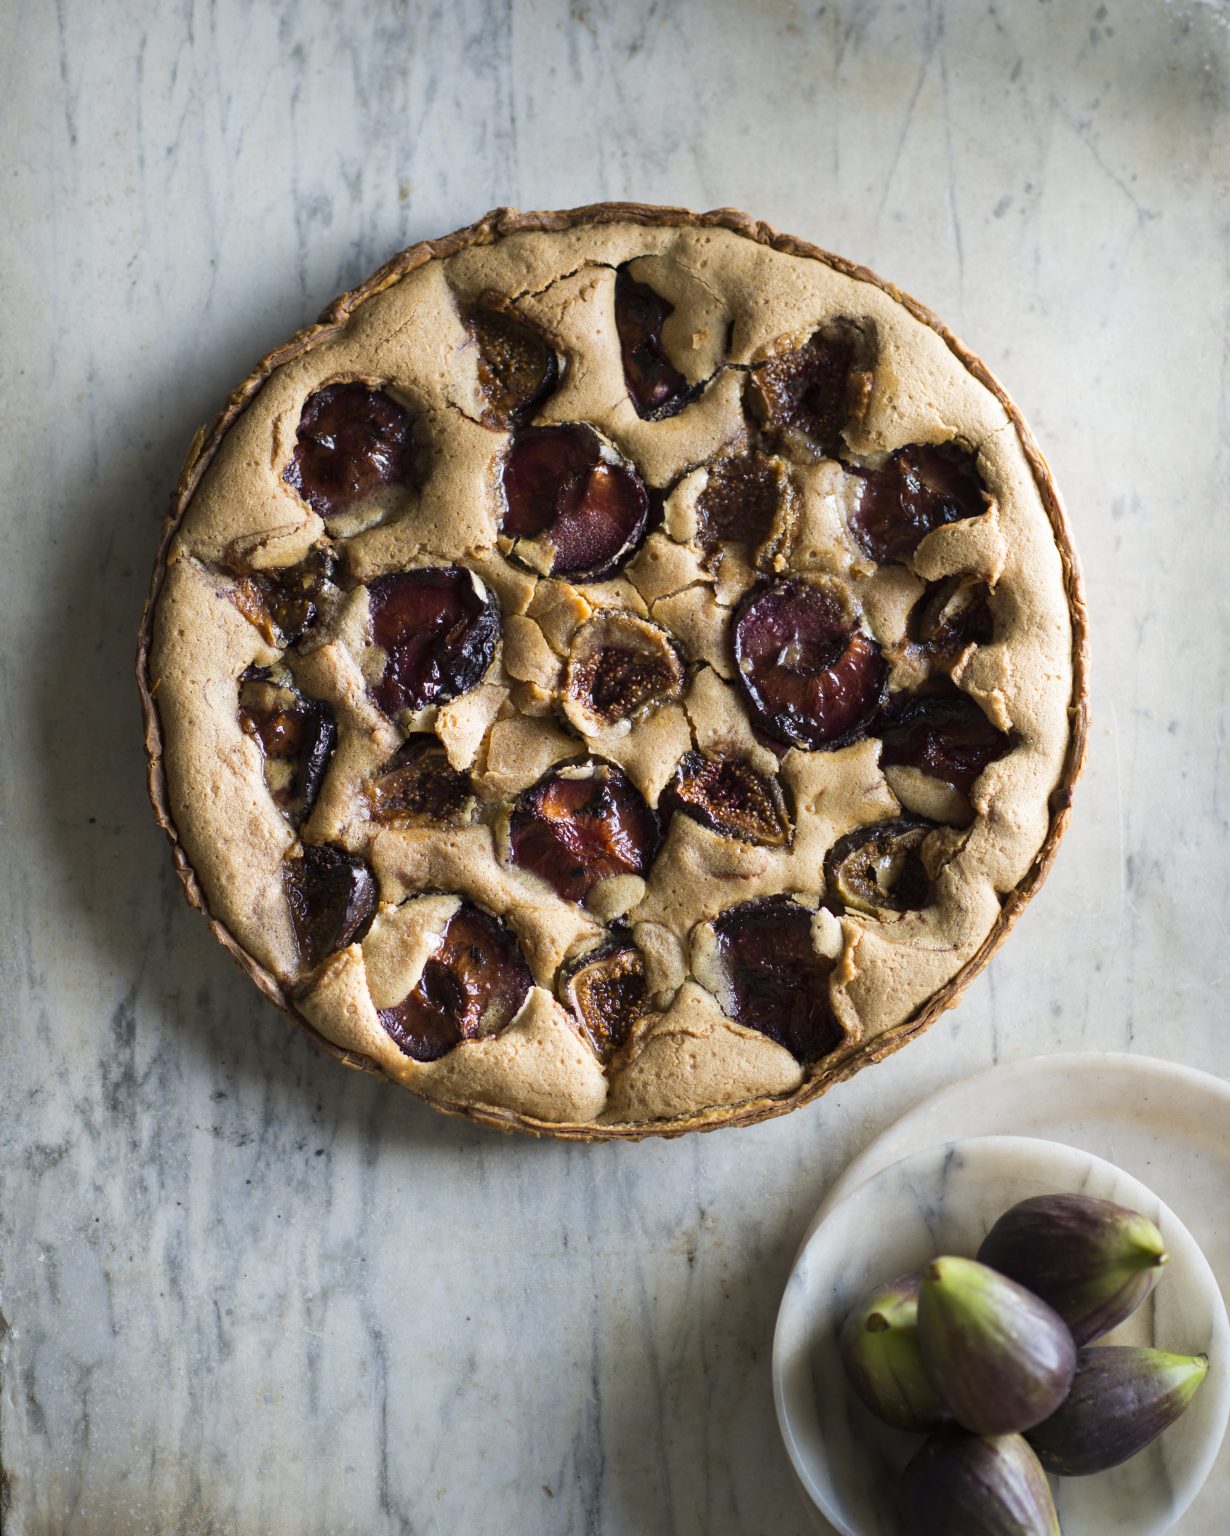 Brown butter tart: Rich and indulgent, with a caramelized flavor